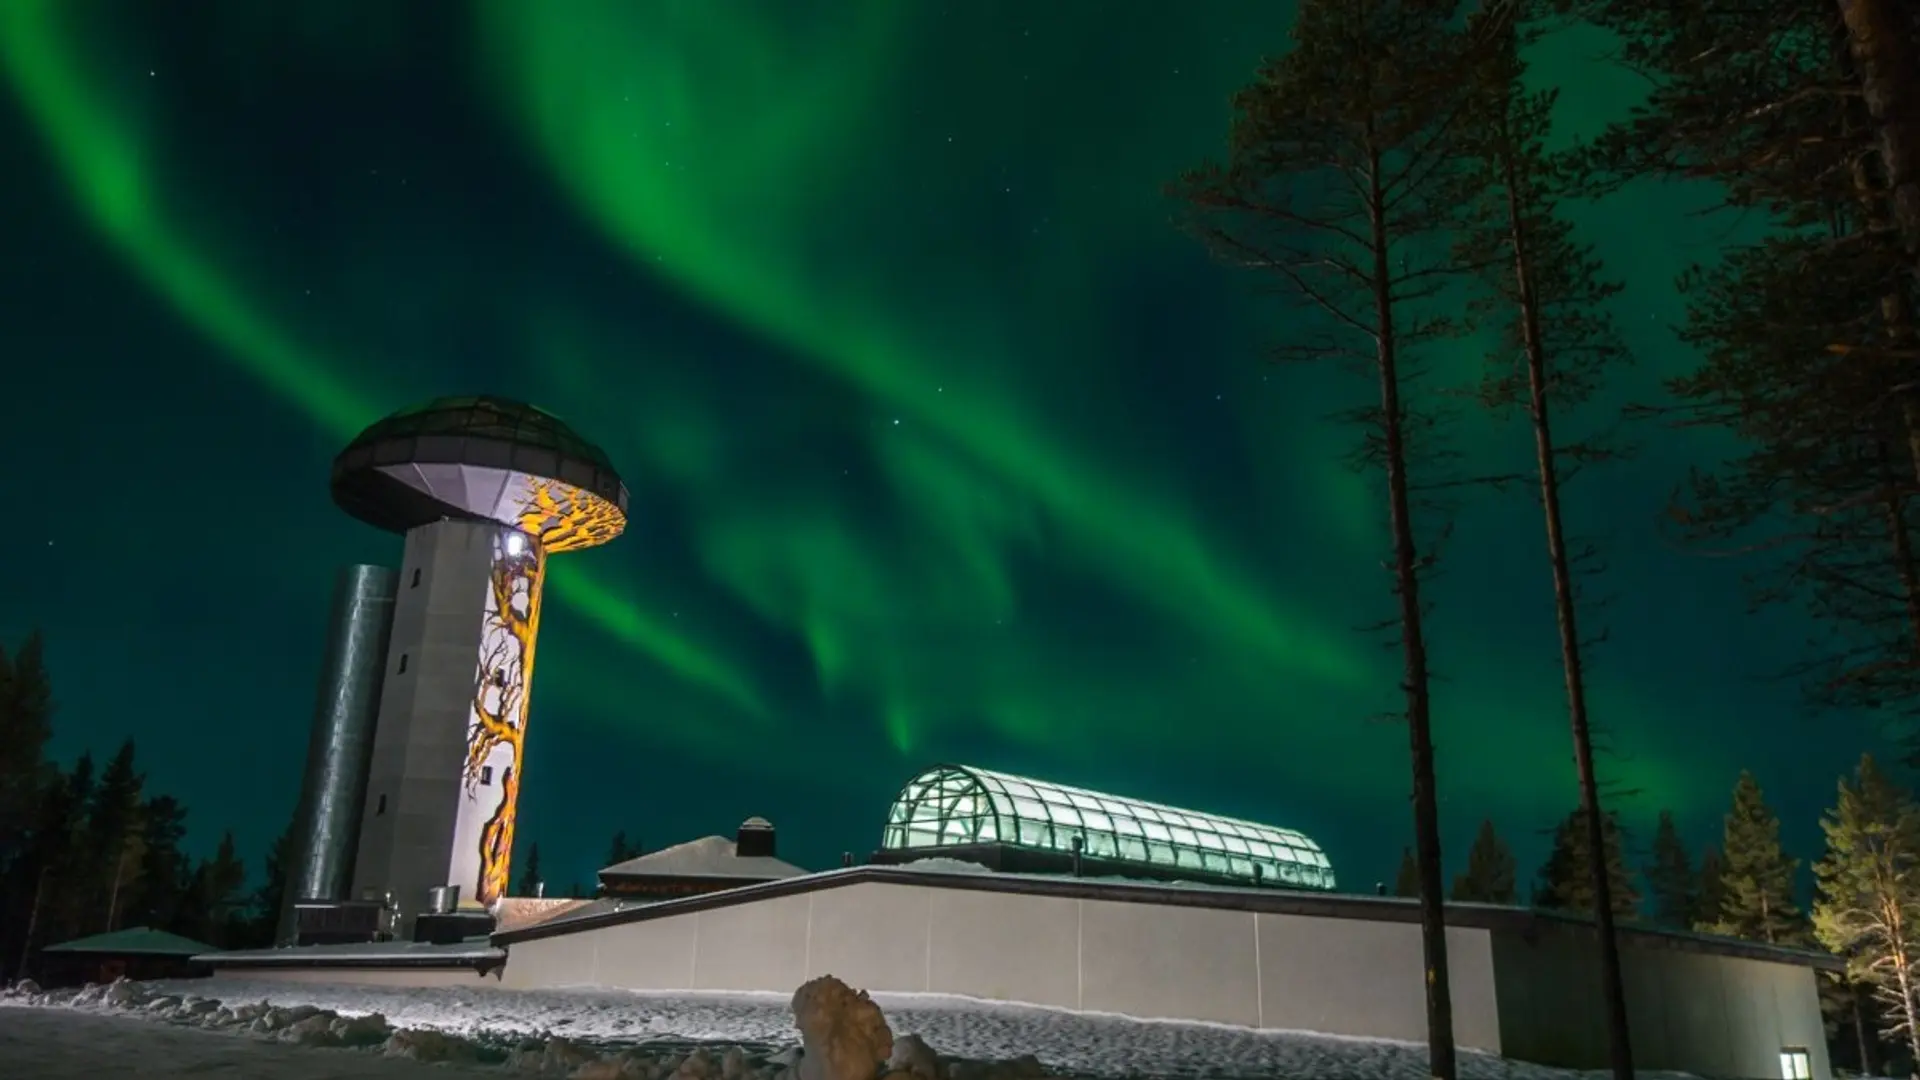 Hotel review Service & Facilities' - Kakslauttanen Arctic Resort - Igloos and Chalets - 14